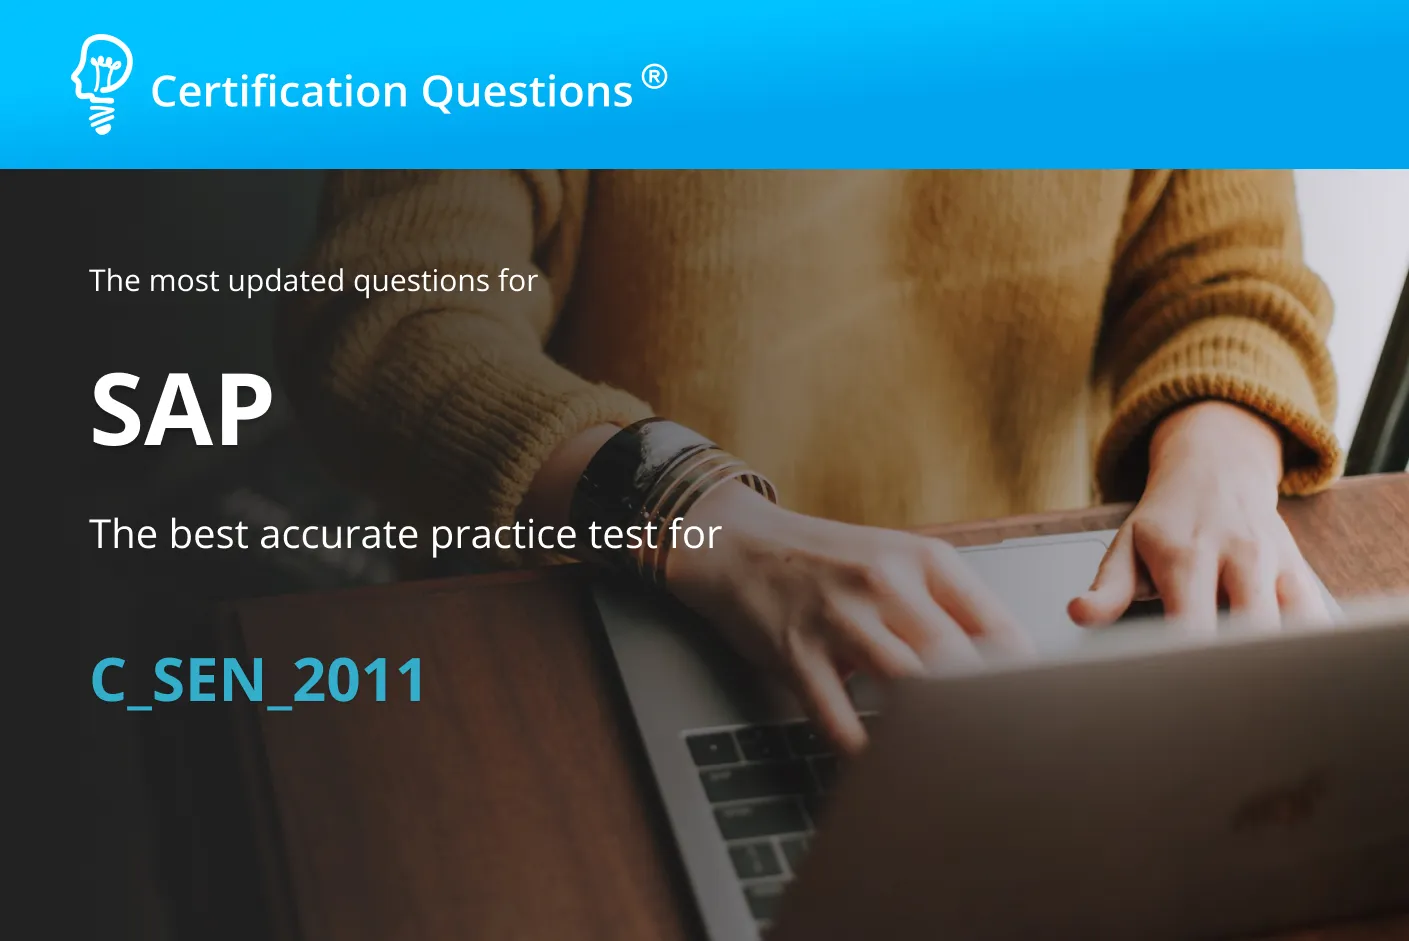 This image is related to SAP Associate certification